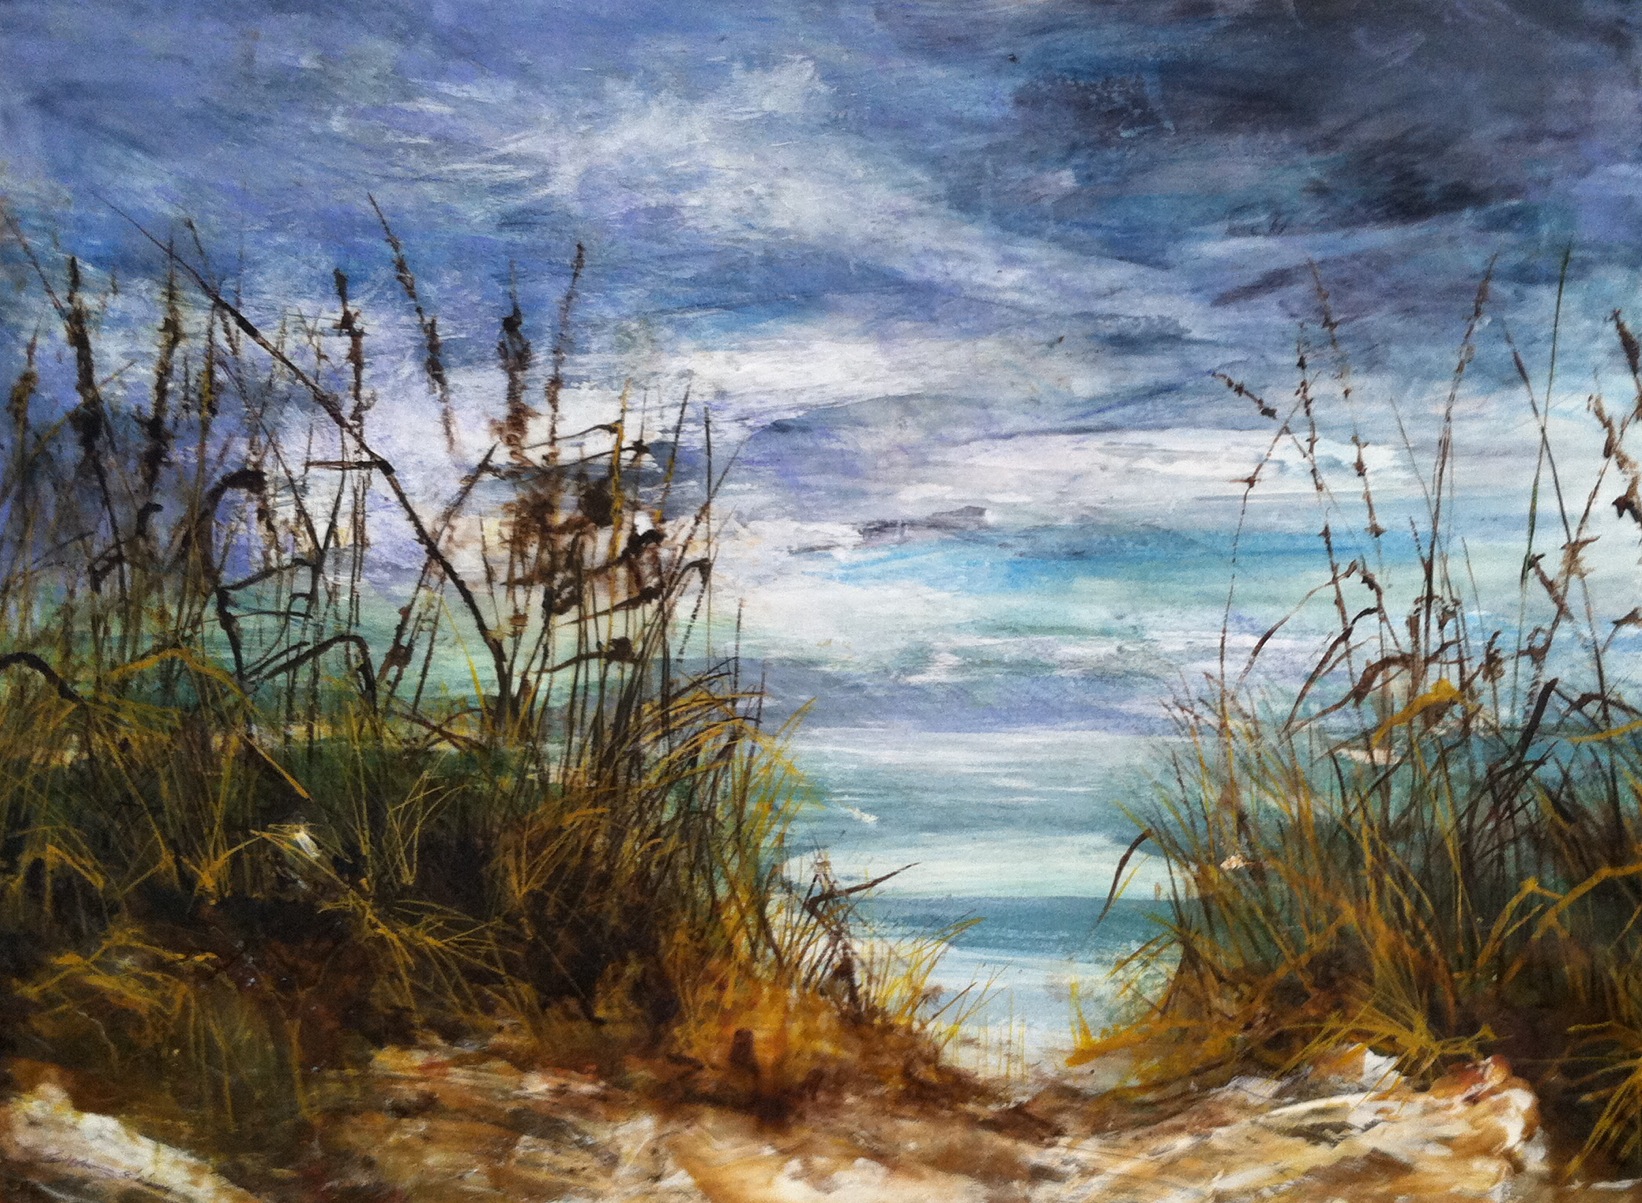  Pass a Grille Beach, Tampa Florida, watercolor, pencil, ink and acrylic on paper, 34"x 26 1/4", 2014  